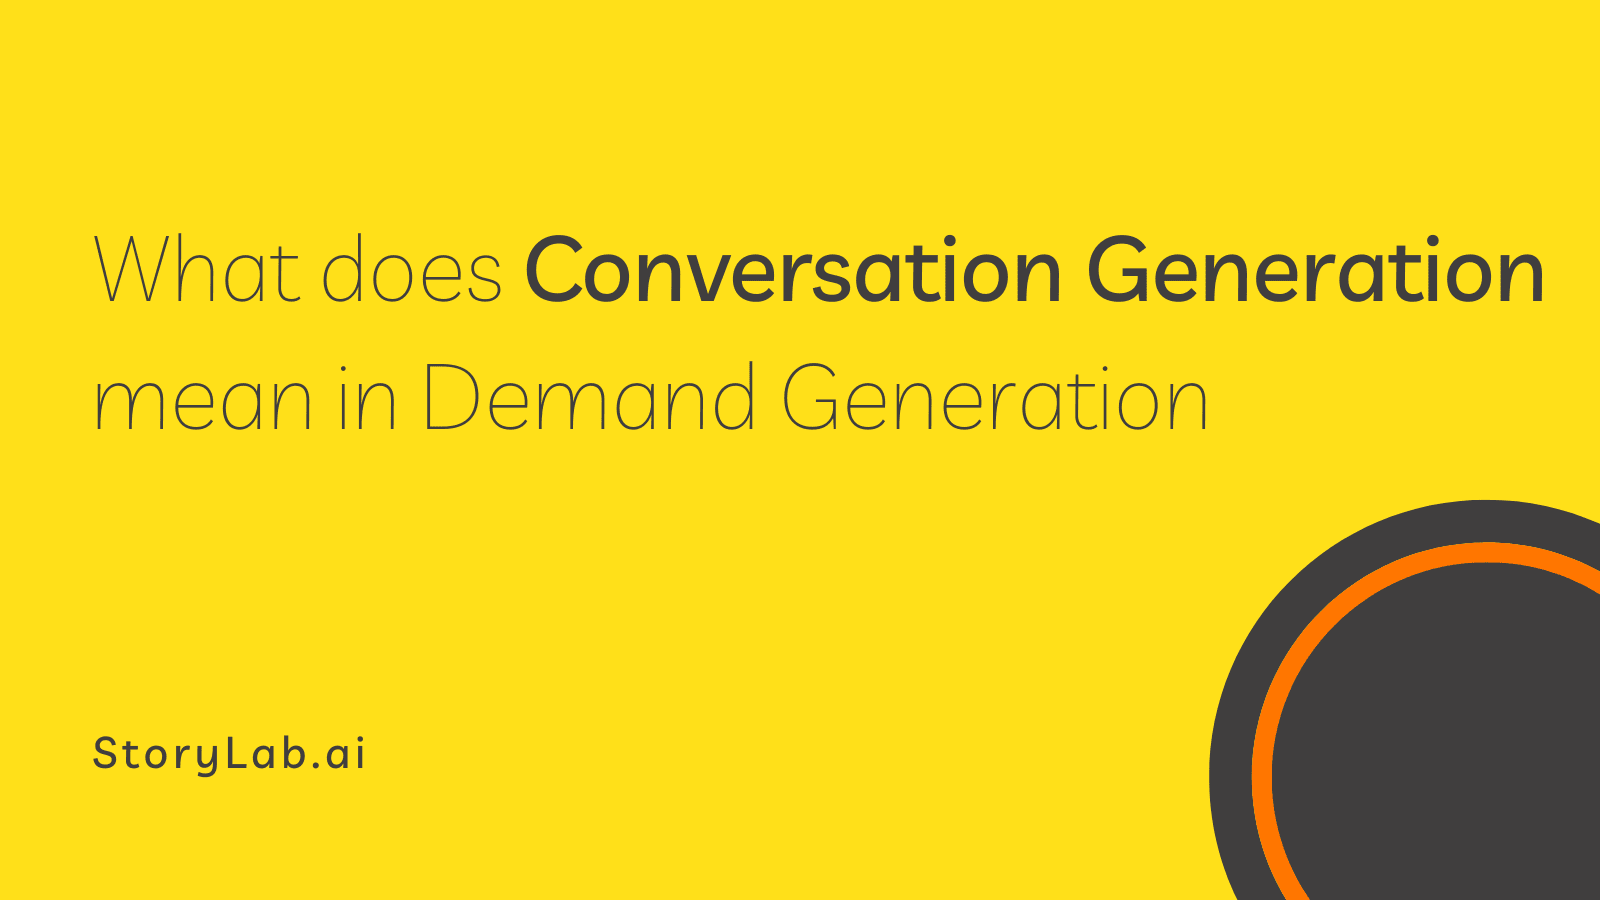 What does Conversation Generation mean in Demand Generation